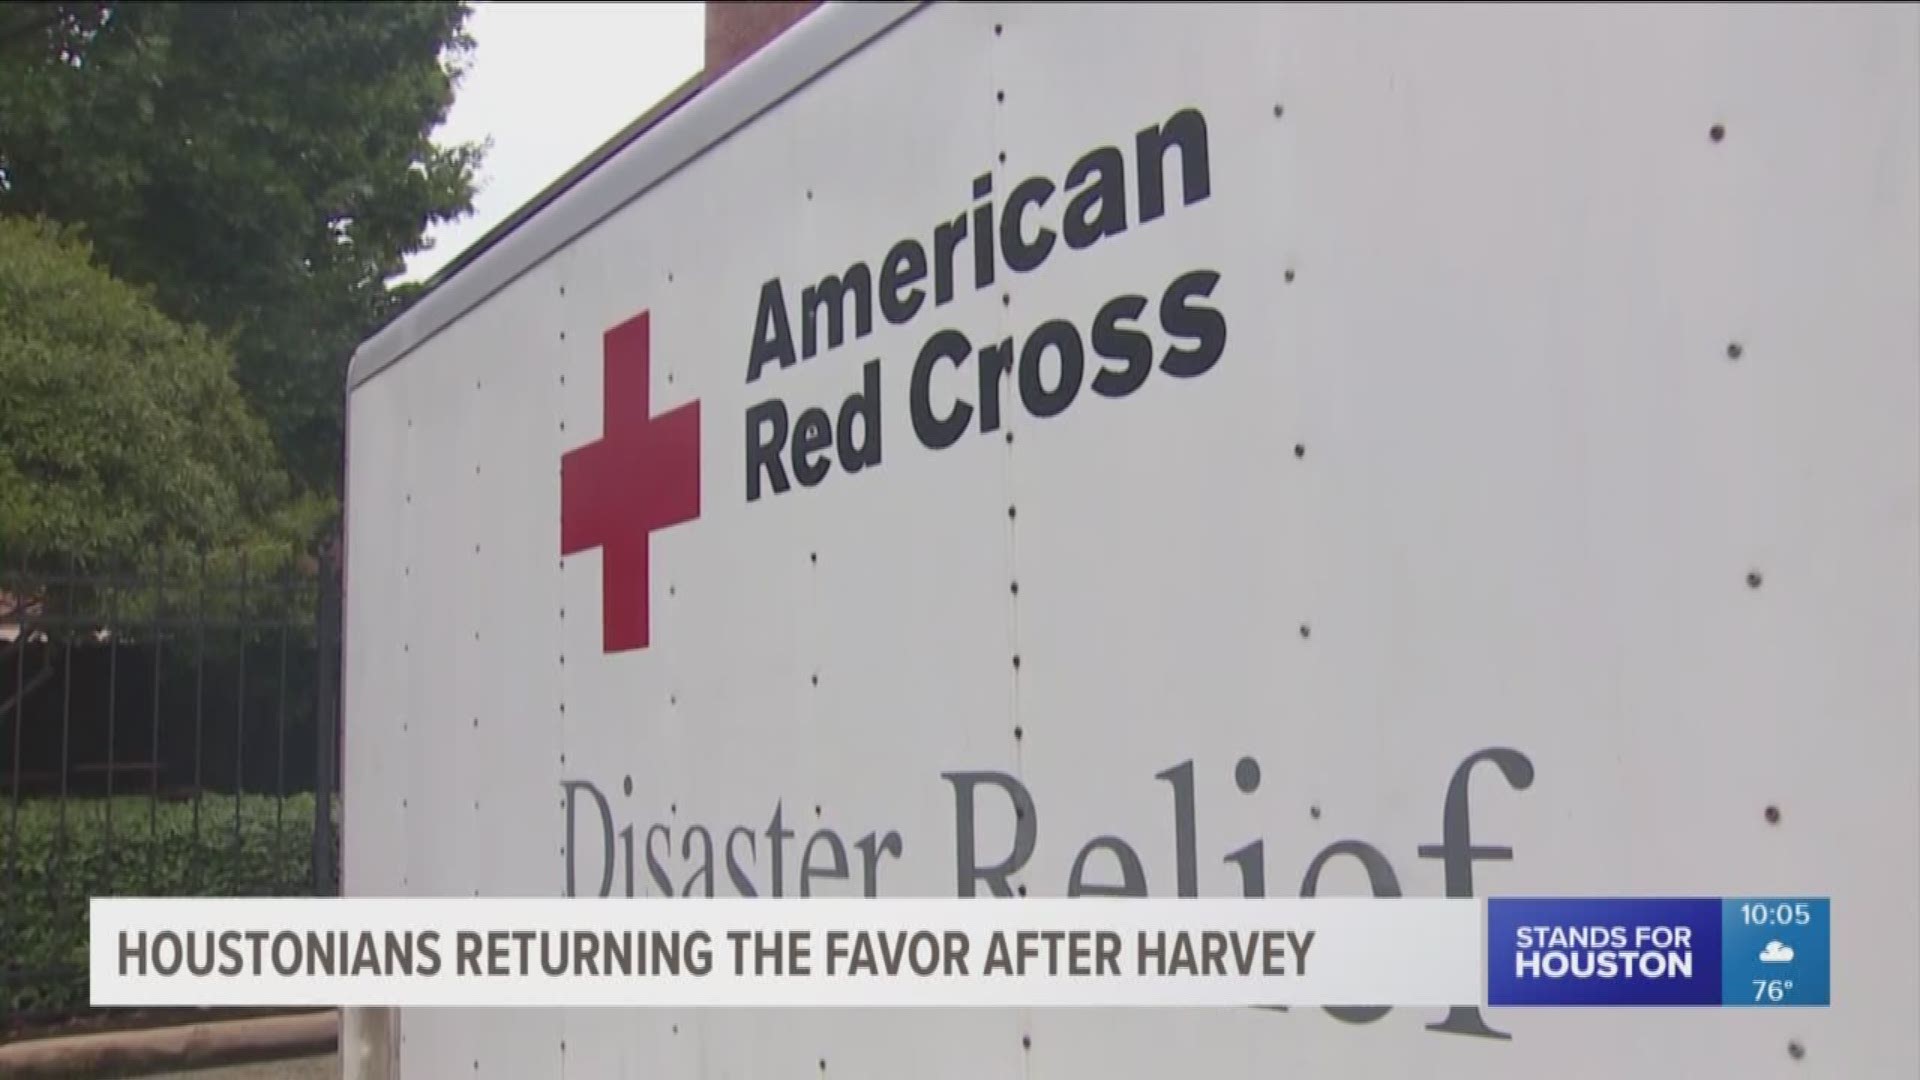 People from across the country came to Houston's aid after Harvey and now Houstonians are traveling to the East Coast to help residents with the Hurricane Florence aftermath. 